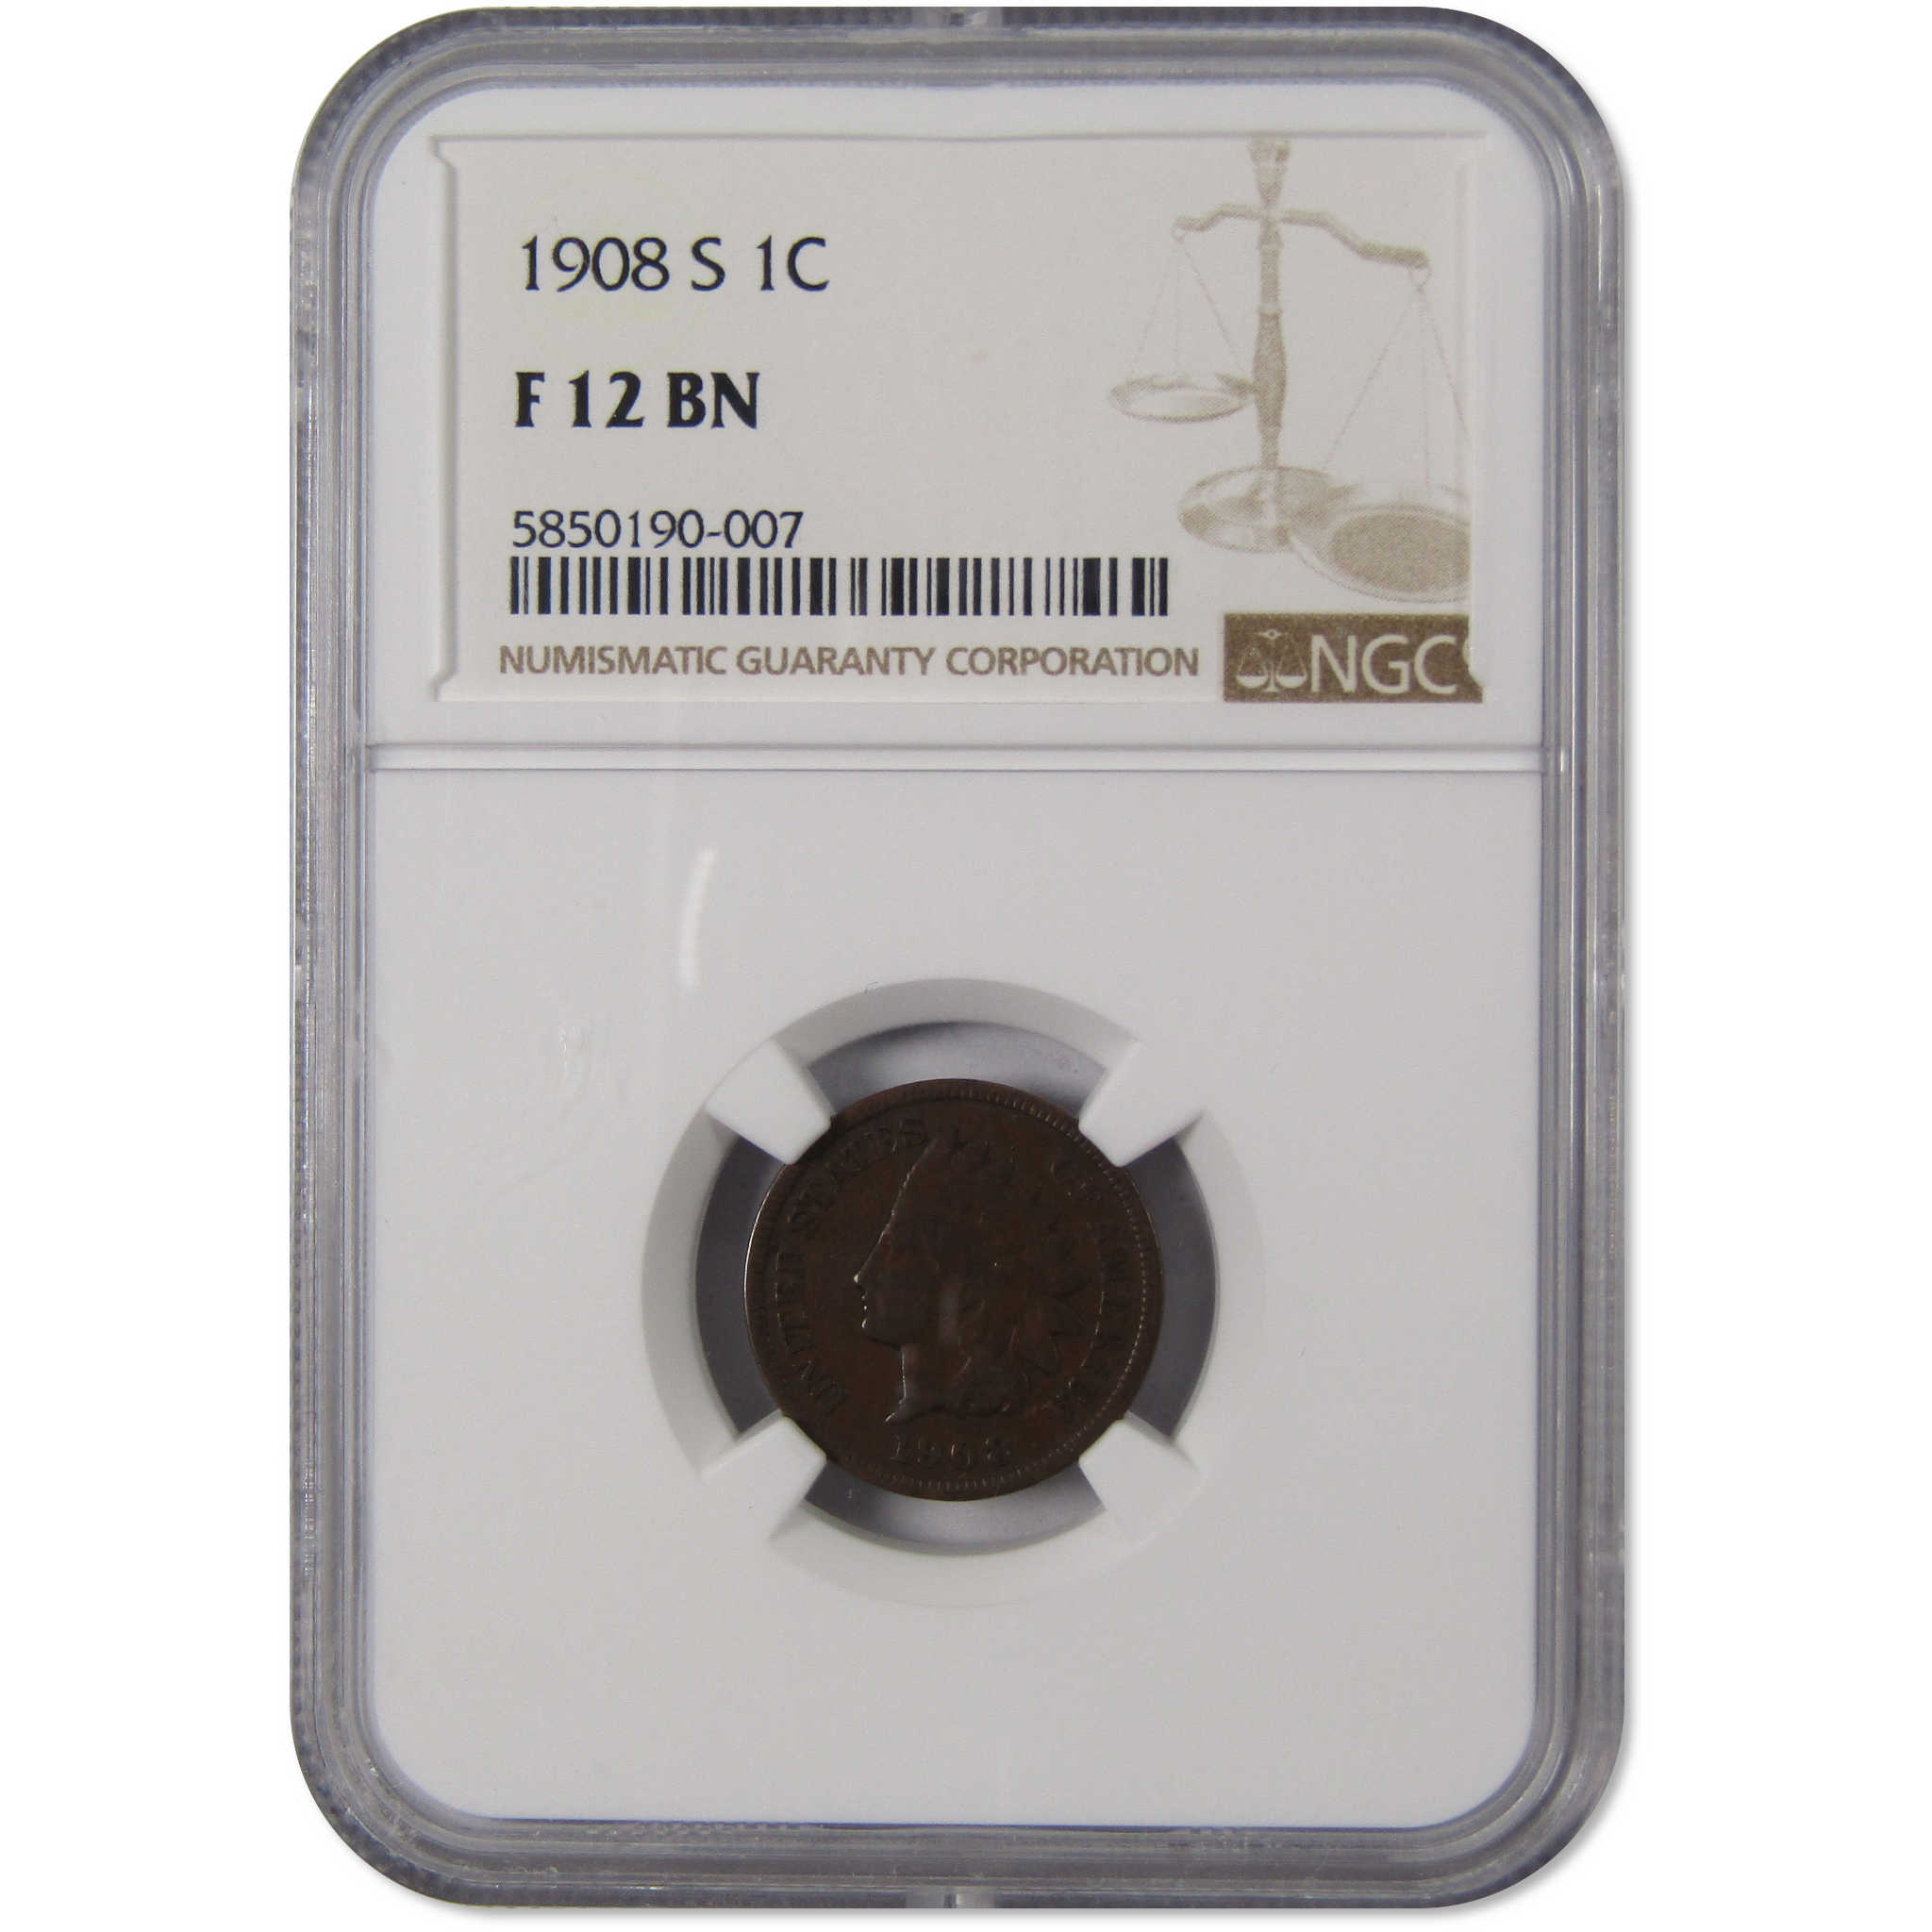 1908 S Indian Head Cent F 12 BN NGC Penny 1c Coin SKU:I9746